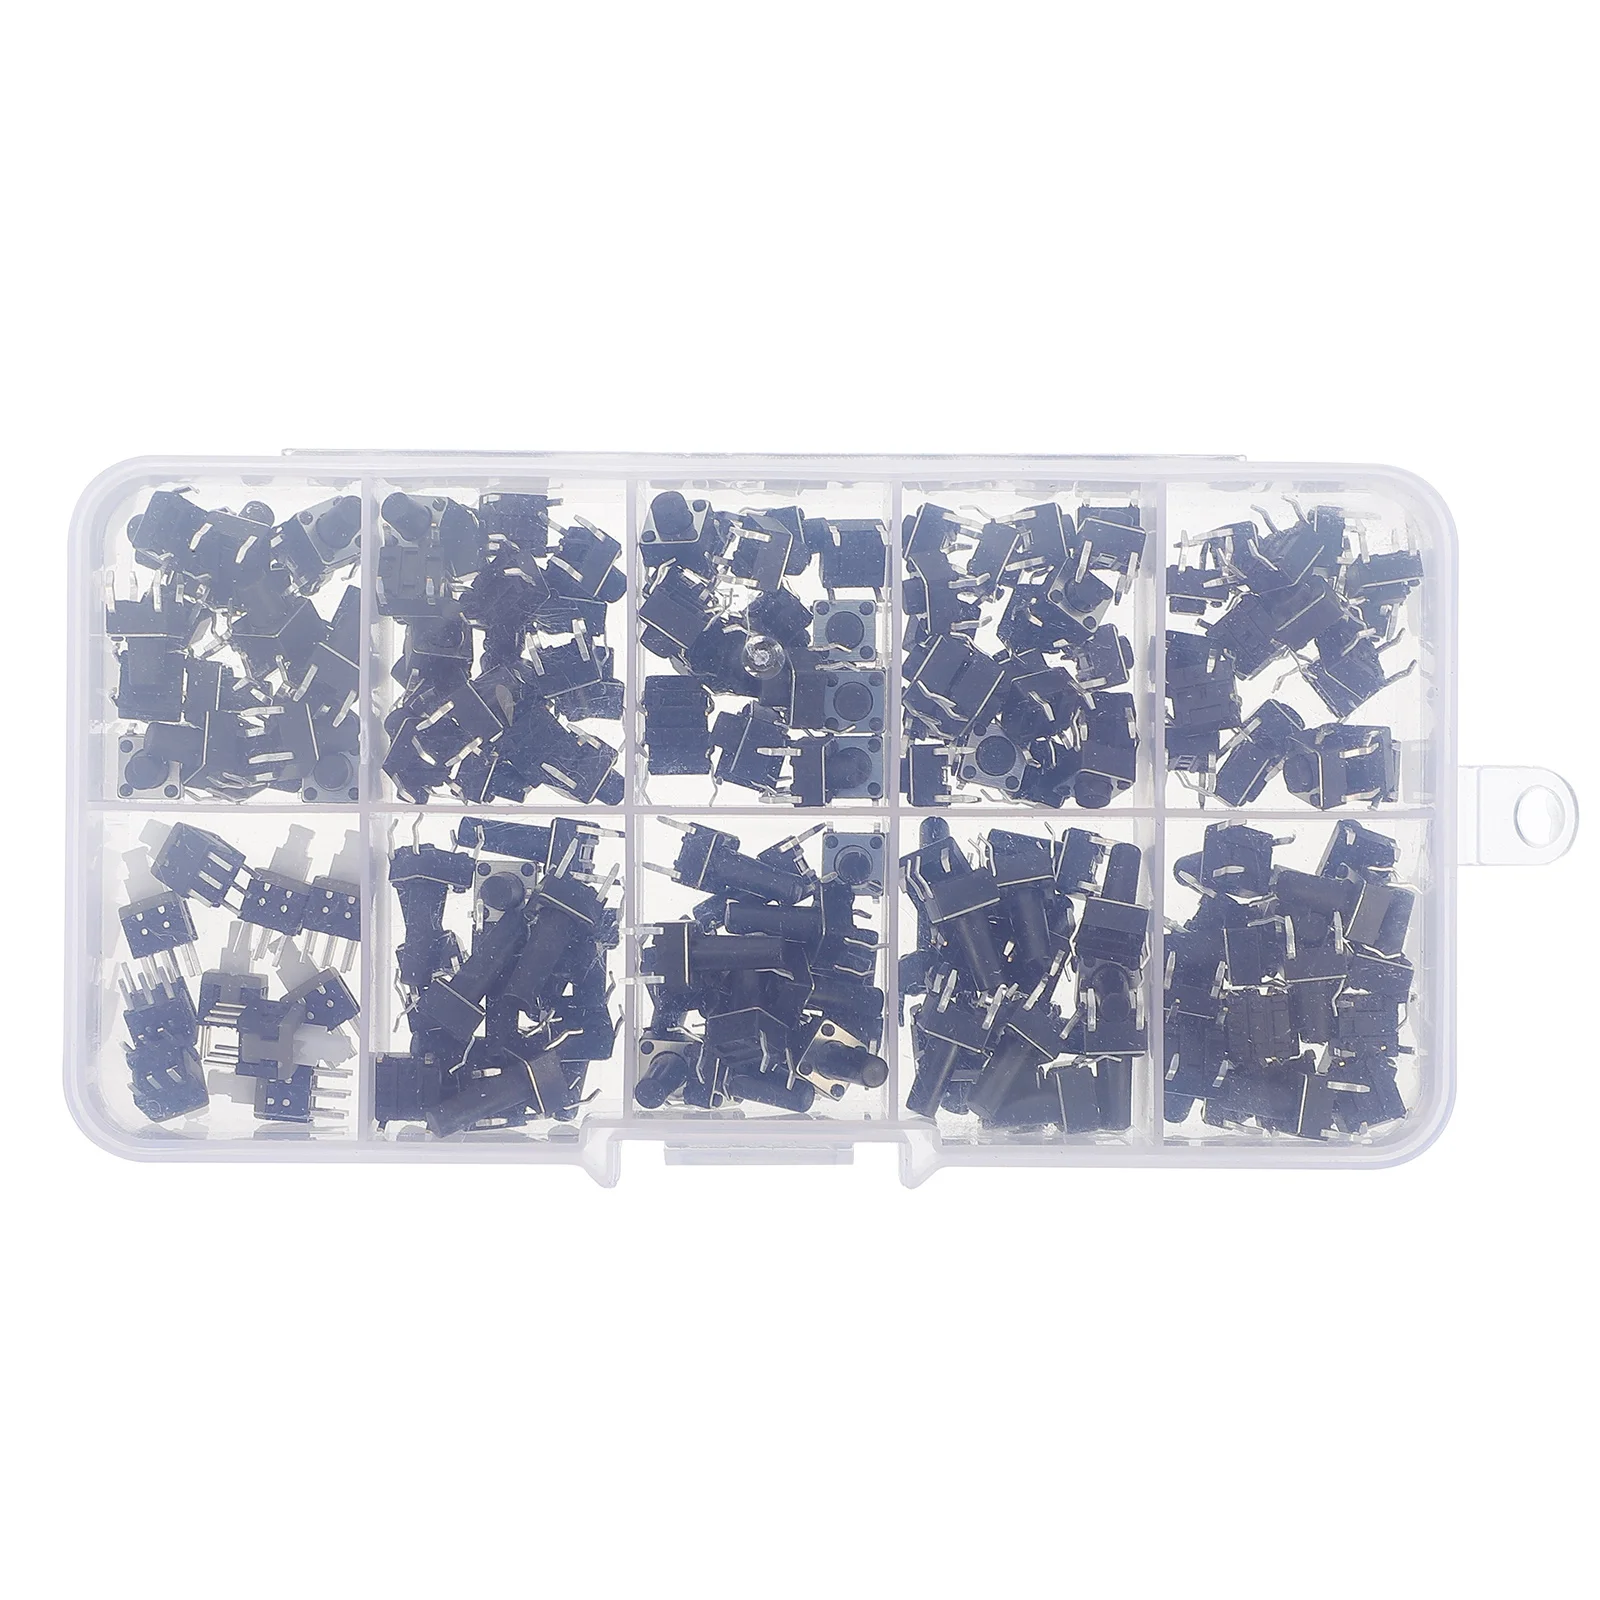 

180 Pcs Electronic Kits Tact Switch Momentary Button Switches Micro DIY Supplies Push Mini buttons